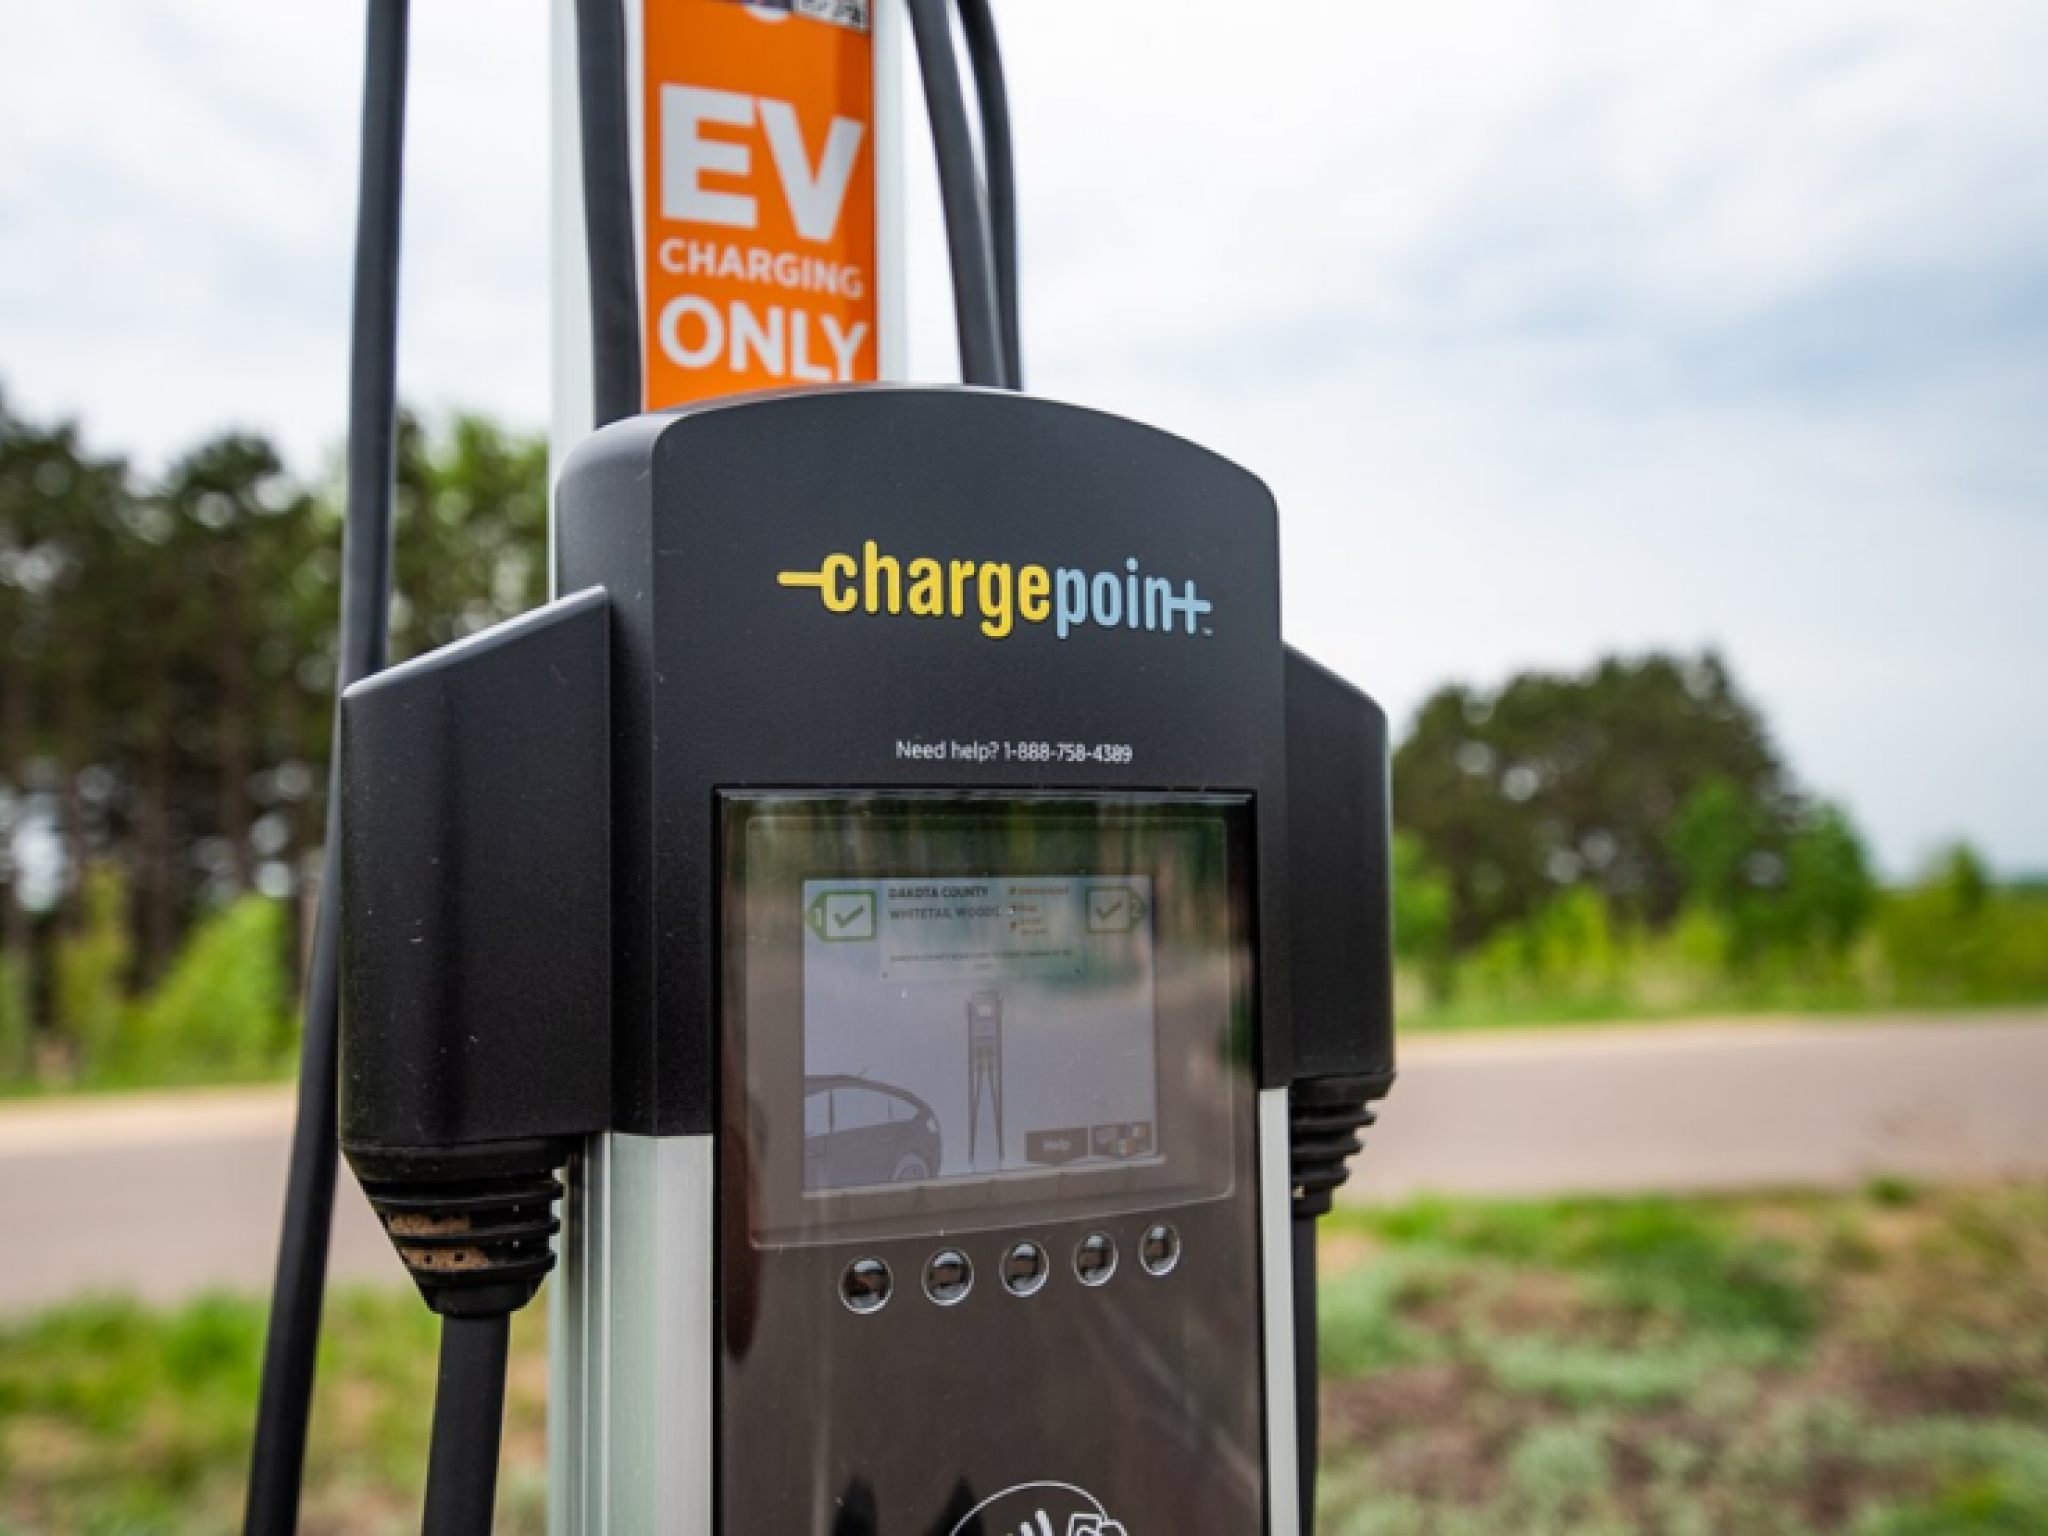  stay-on-sidelines---chargepoint-analysts-say-despite-positive-q1-await-more-proof-of-growth 